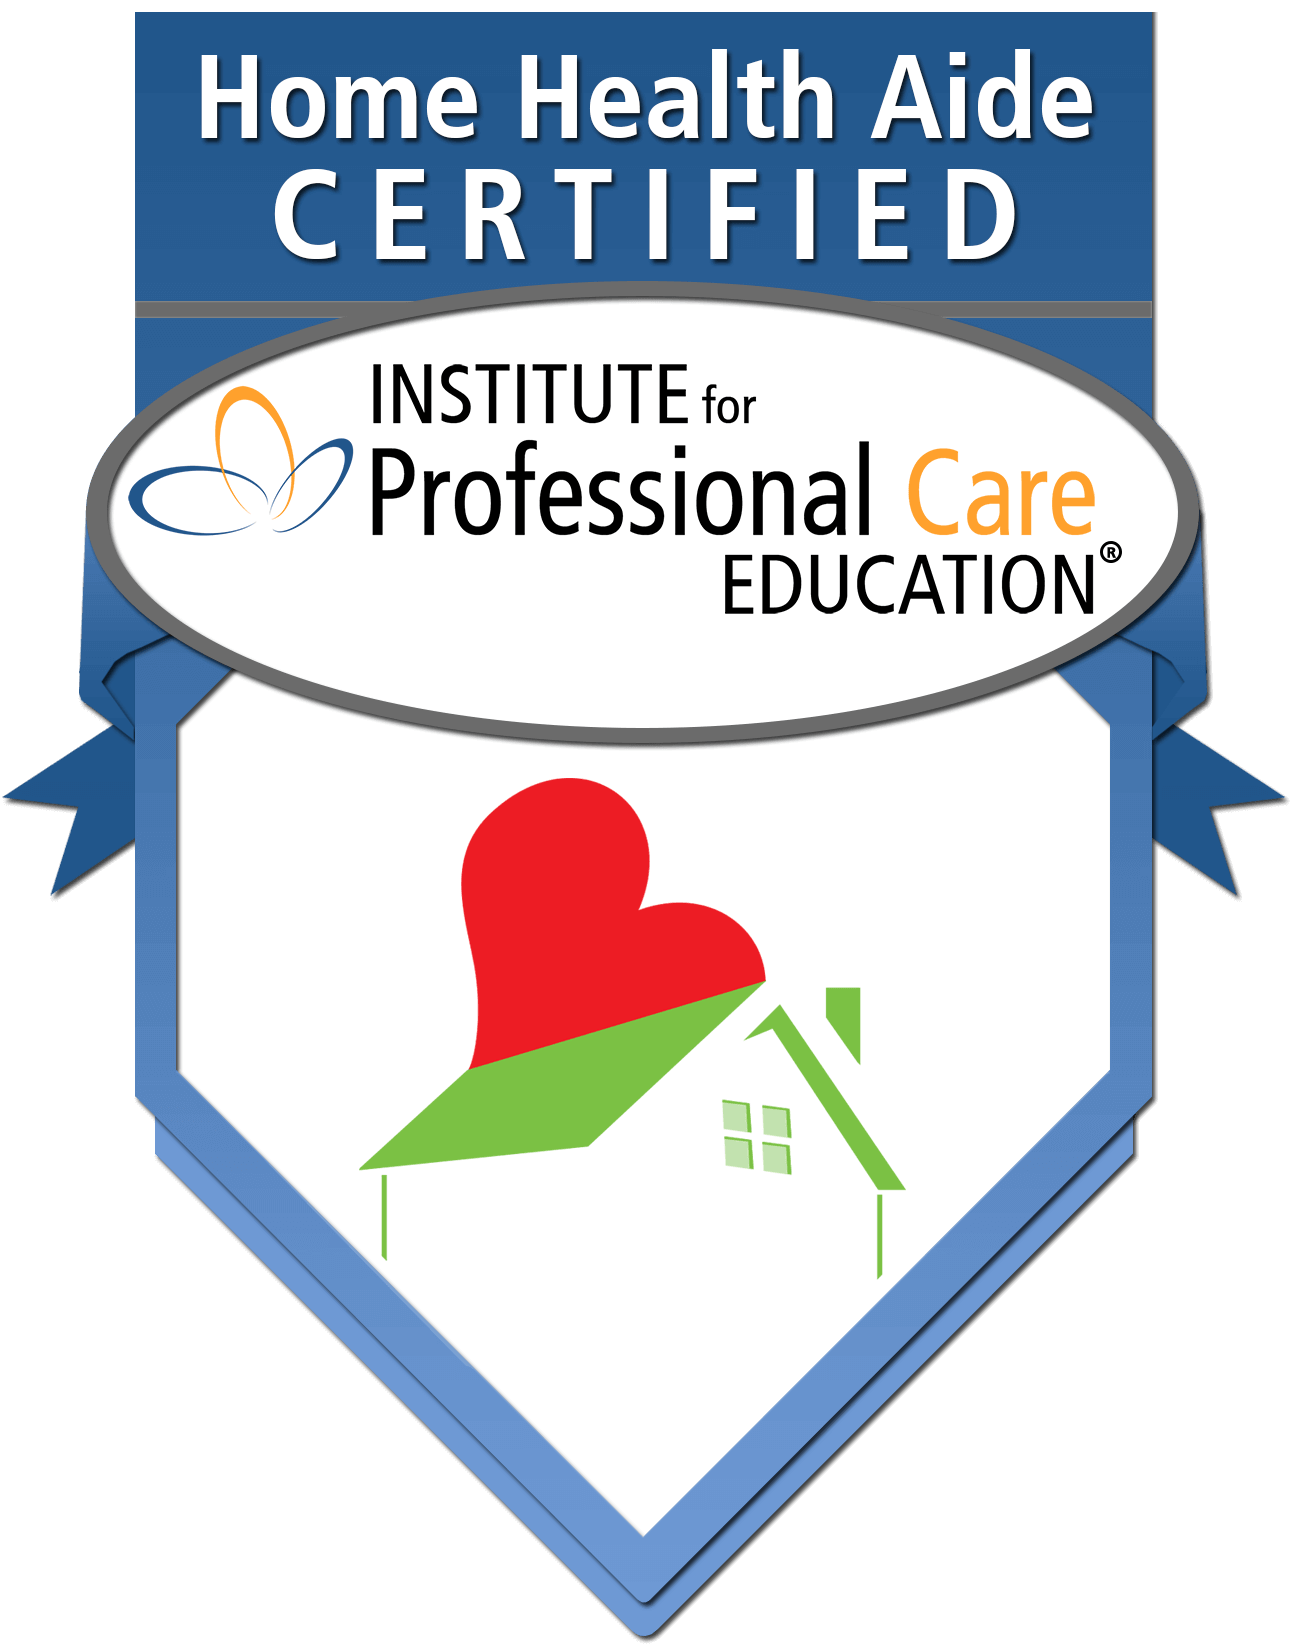 Homecare Agency is Home Health Aide Certified by Institute for Professional Care Education